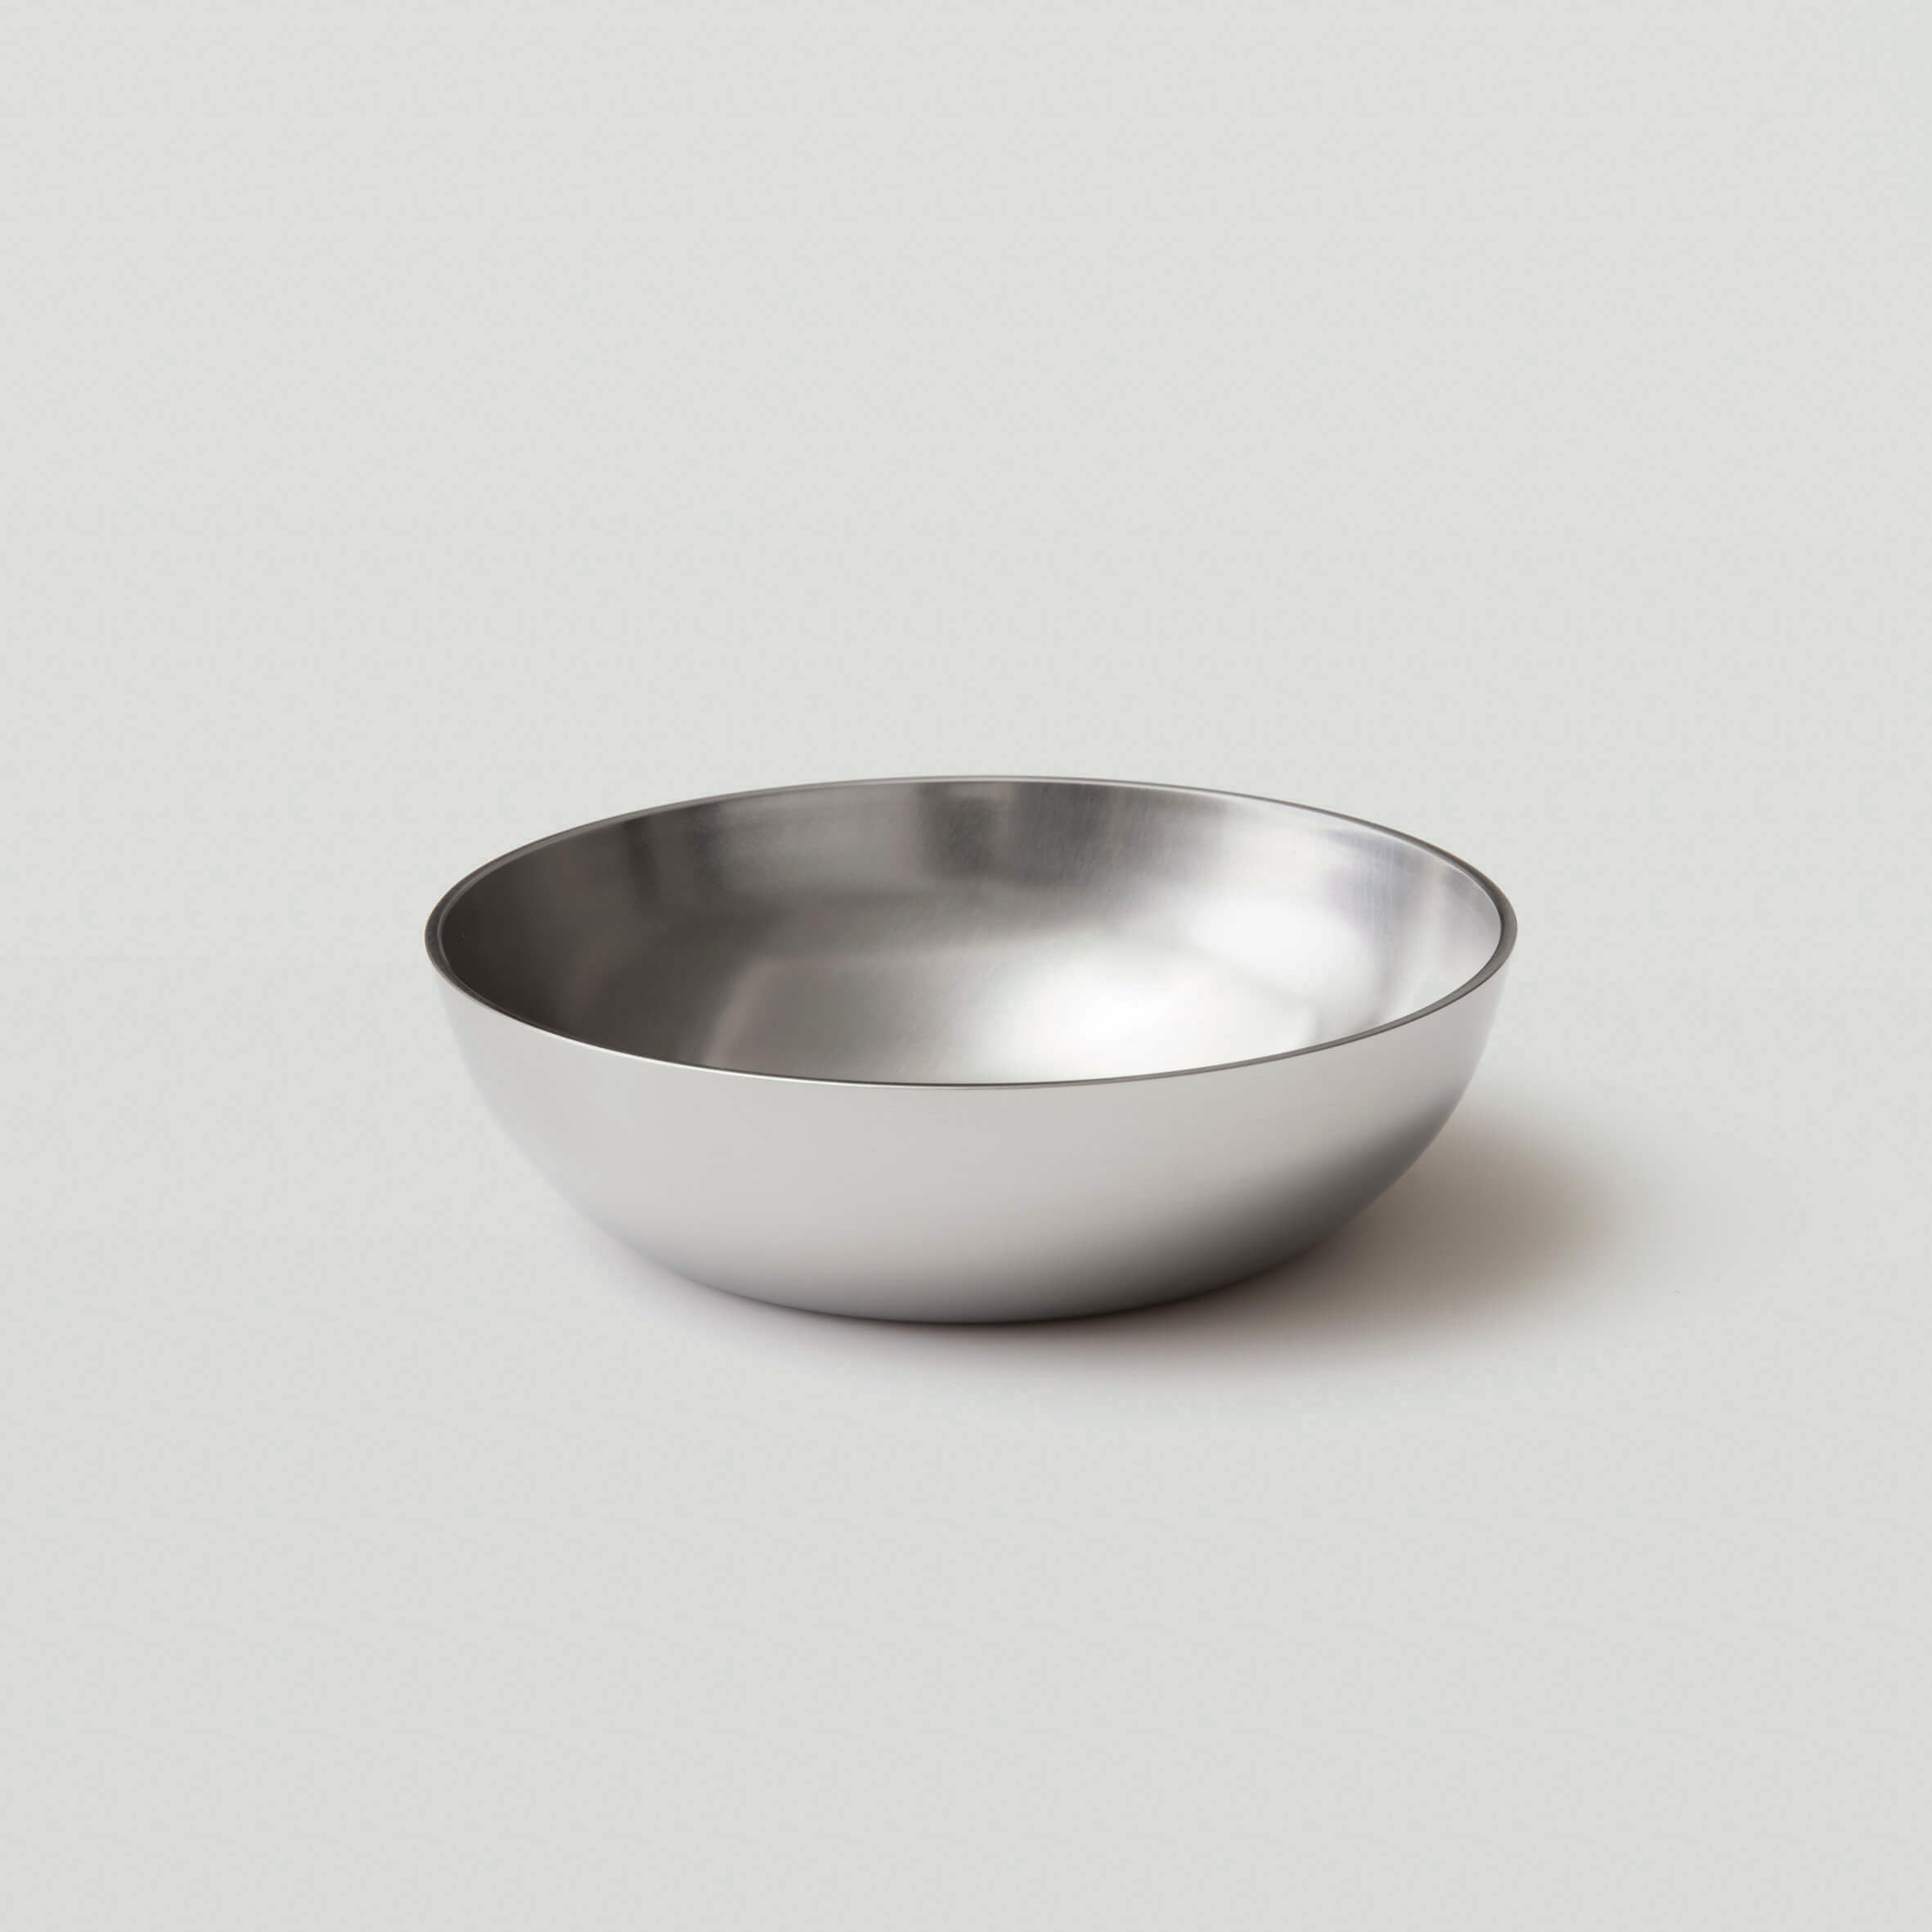 Less Stainless Steel Bowl